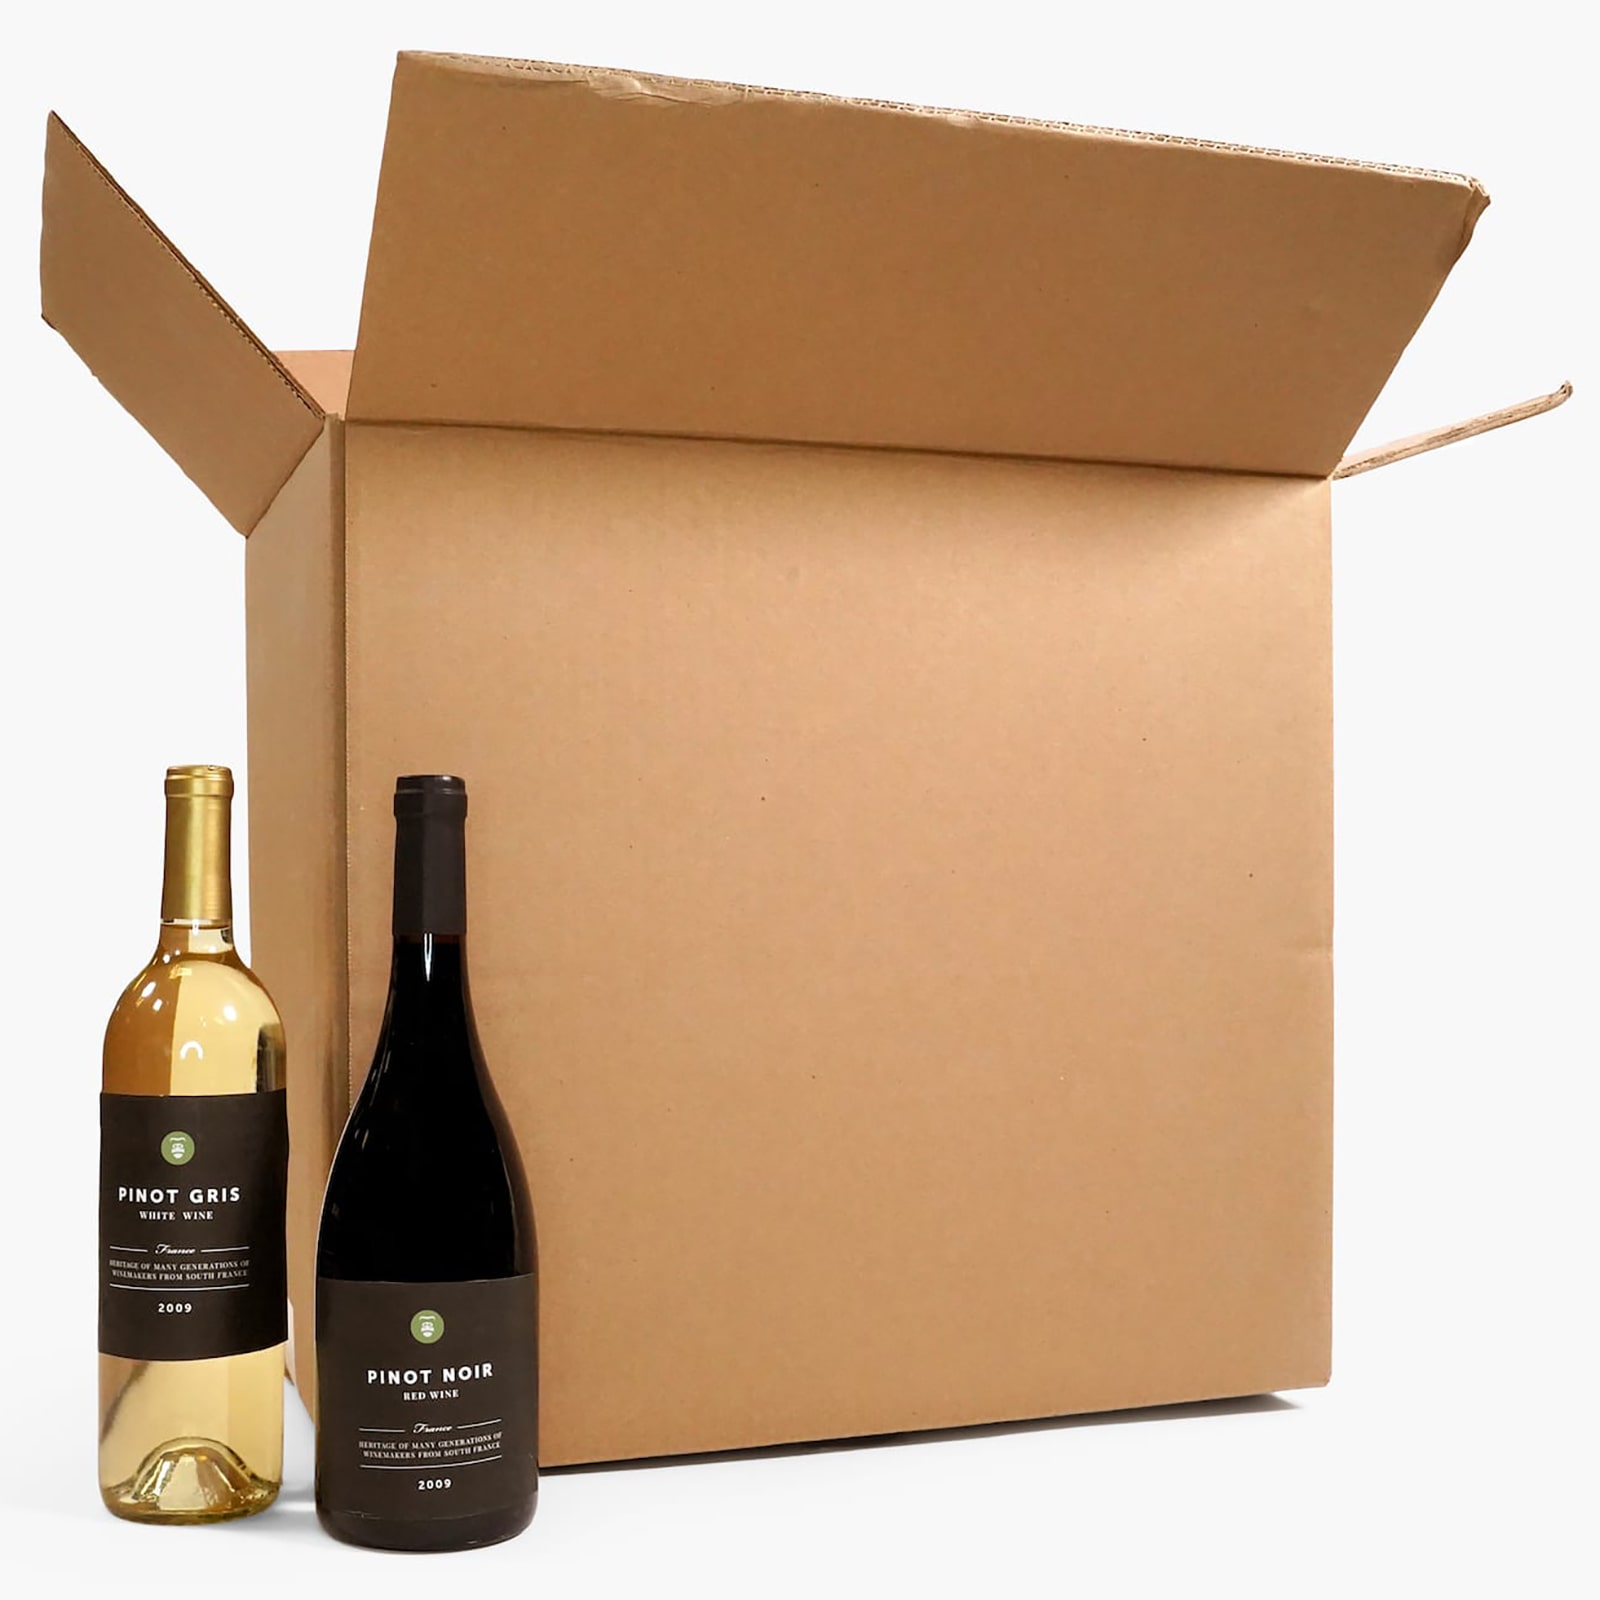 5, 10, 15 12 Wine Bottle Strong Cardboard Box with Inserts 5 Boxes + Insert Bundle 